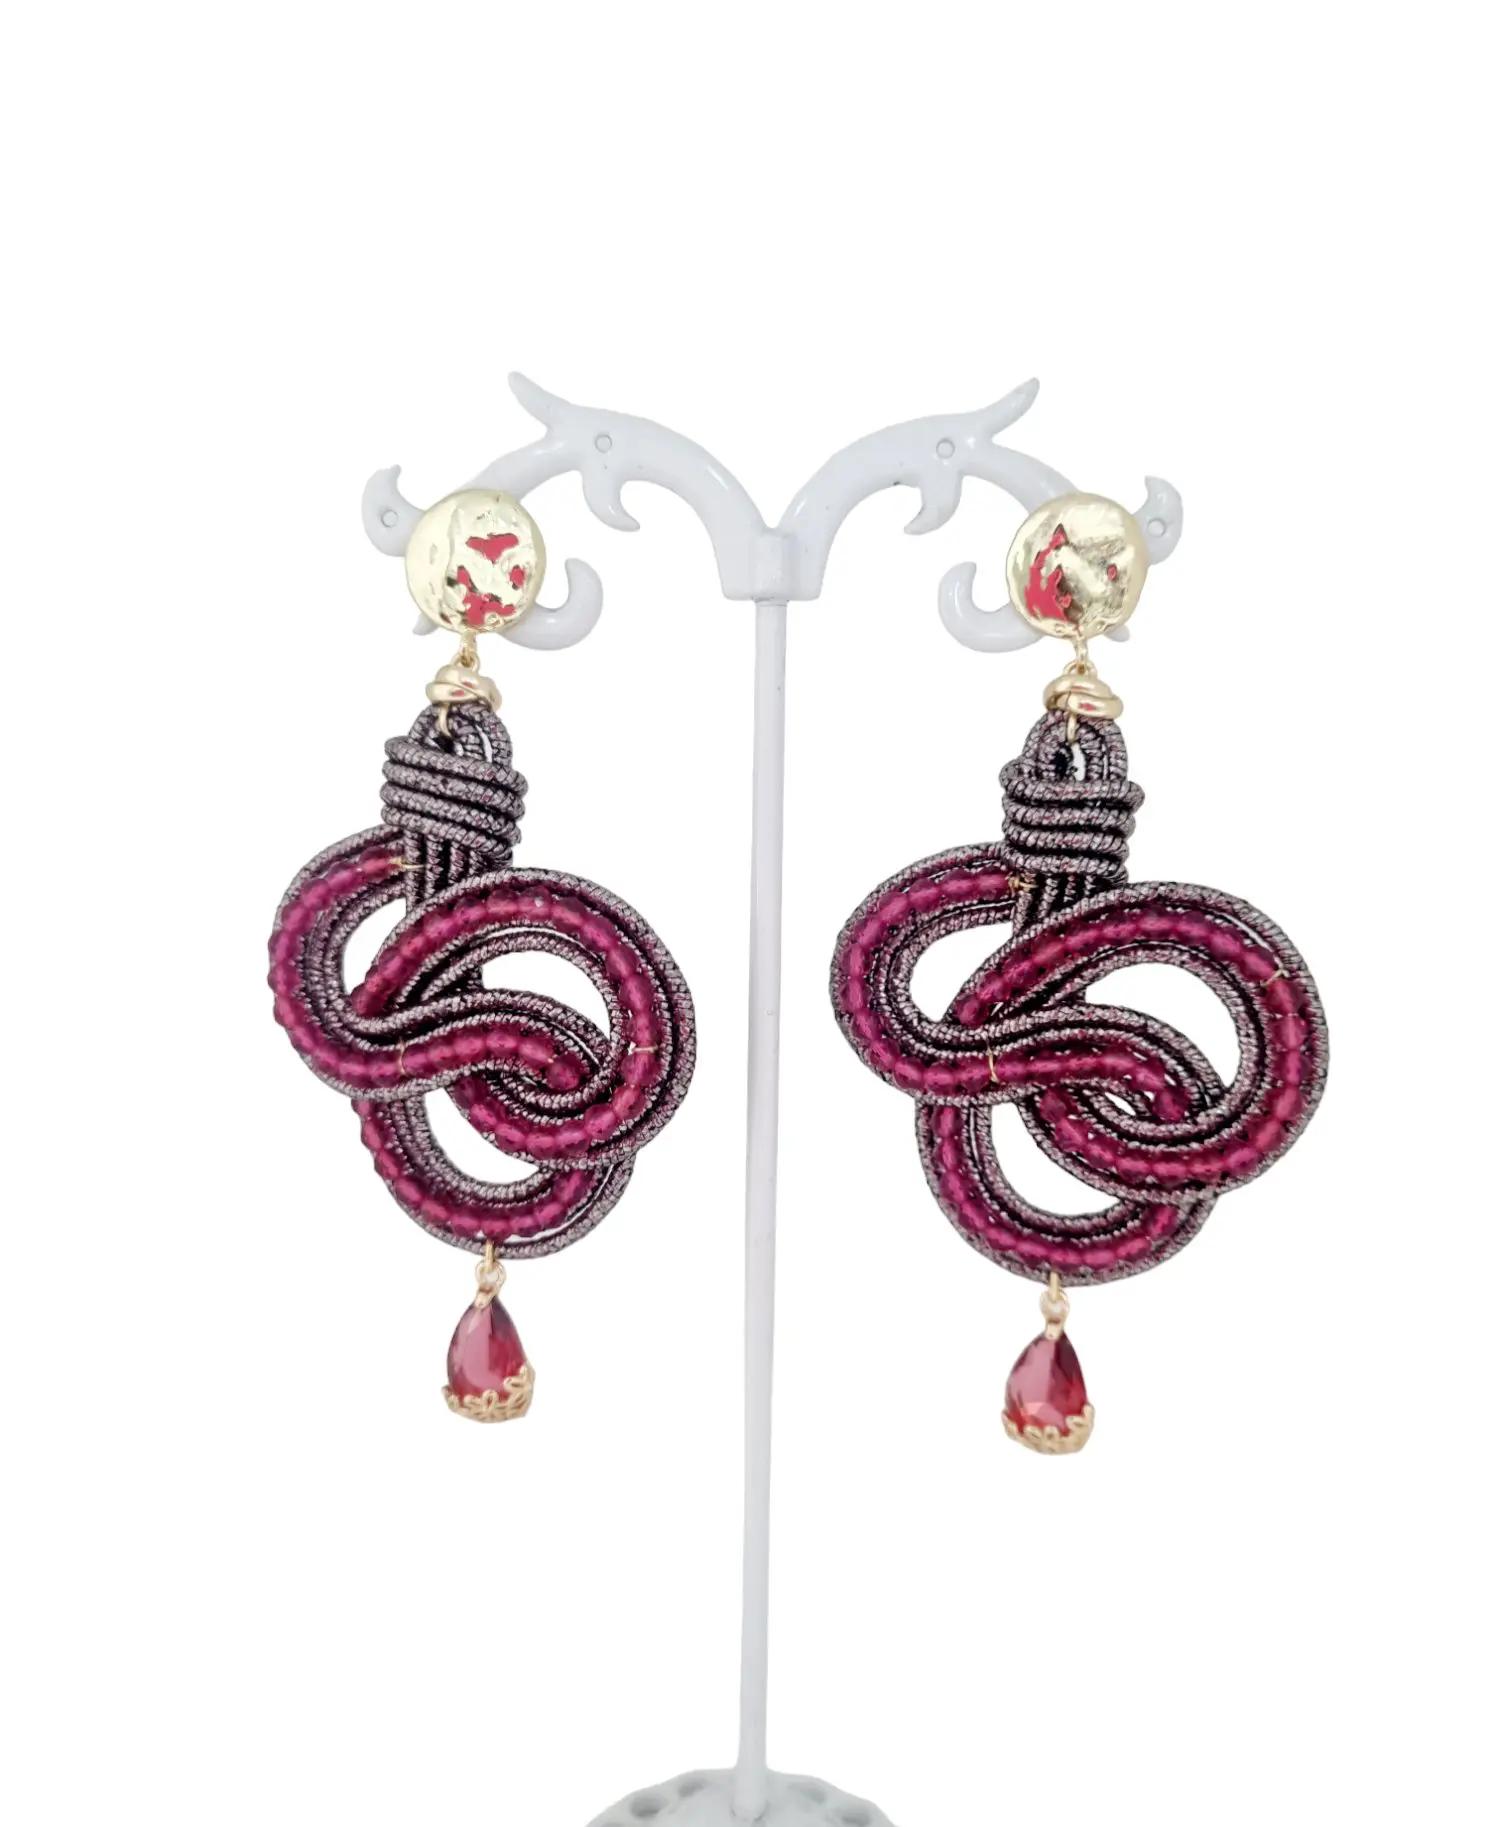 Earrings handcrafted with glittery fabric and fuchsia crystals. Length 8cm Weight 8.2gr